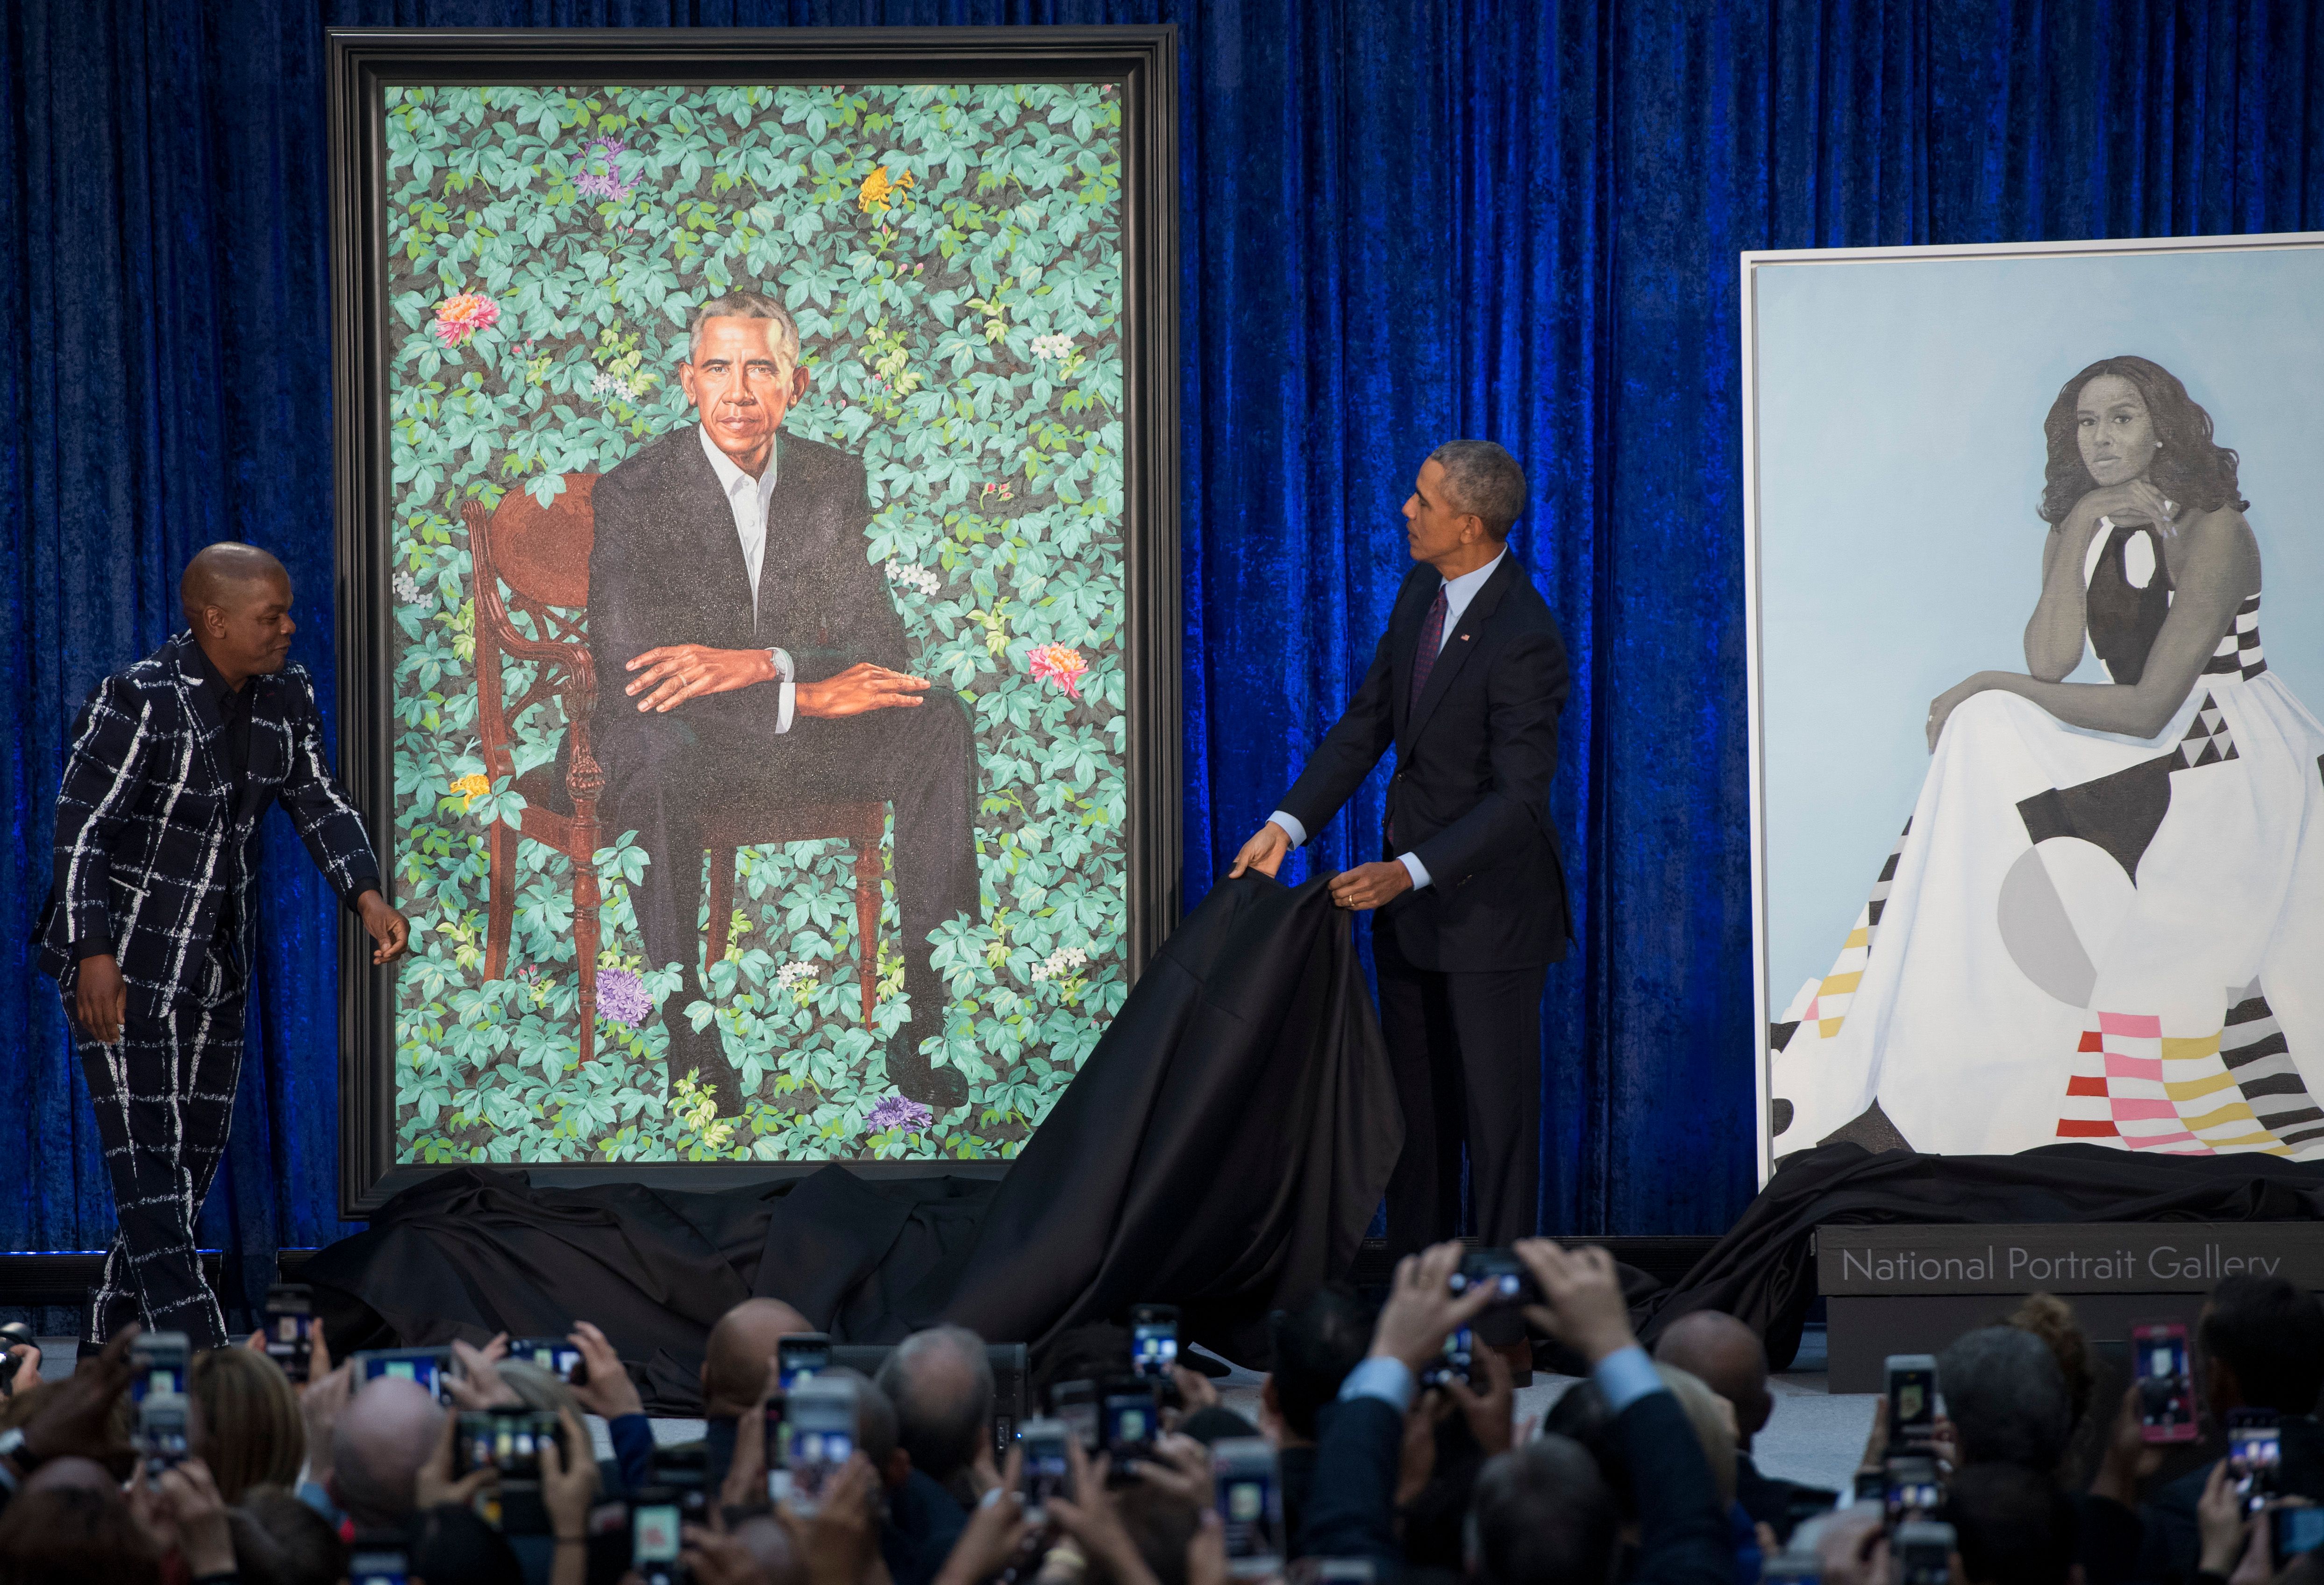 Obama Portraits: What the Art Reveals about Power, Progress | Time